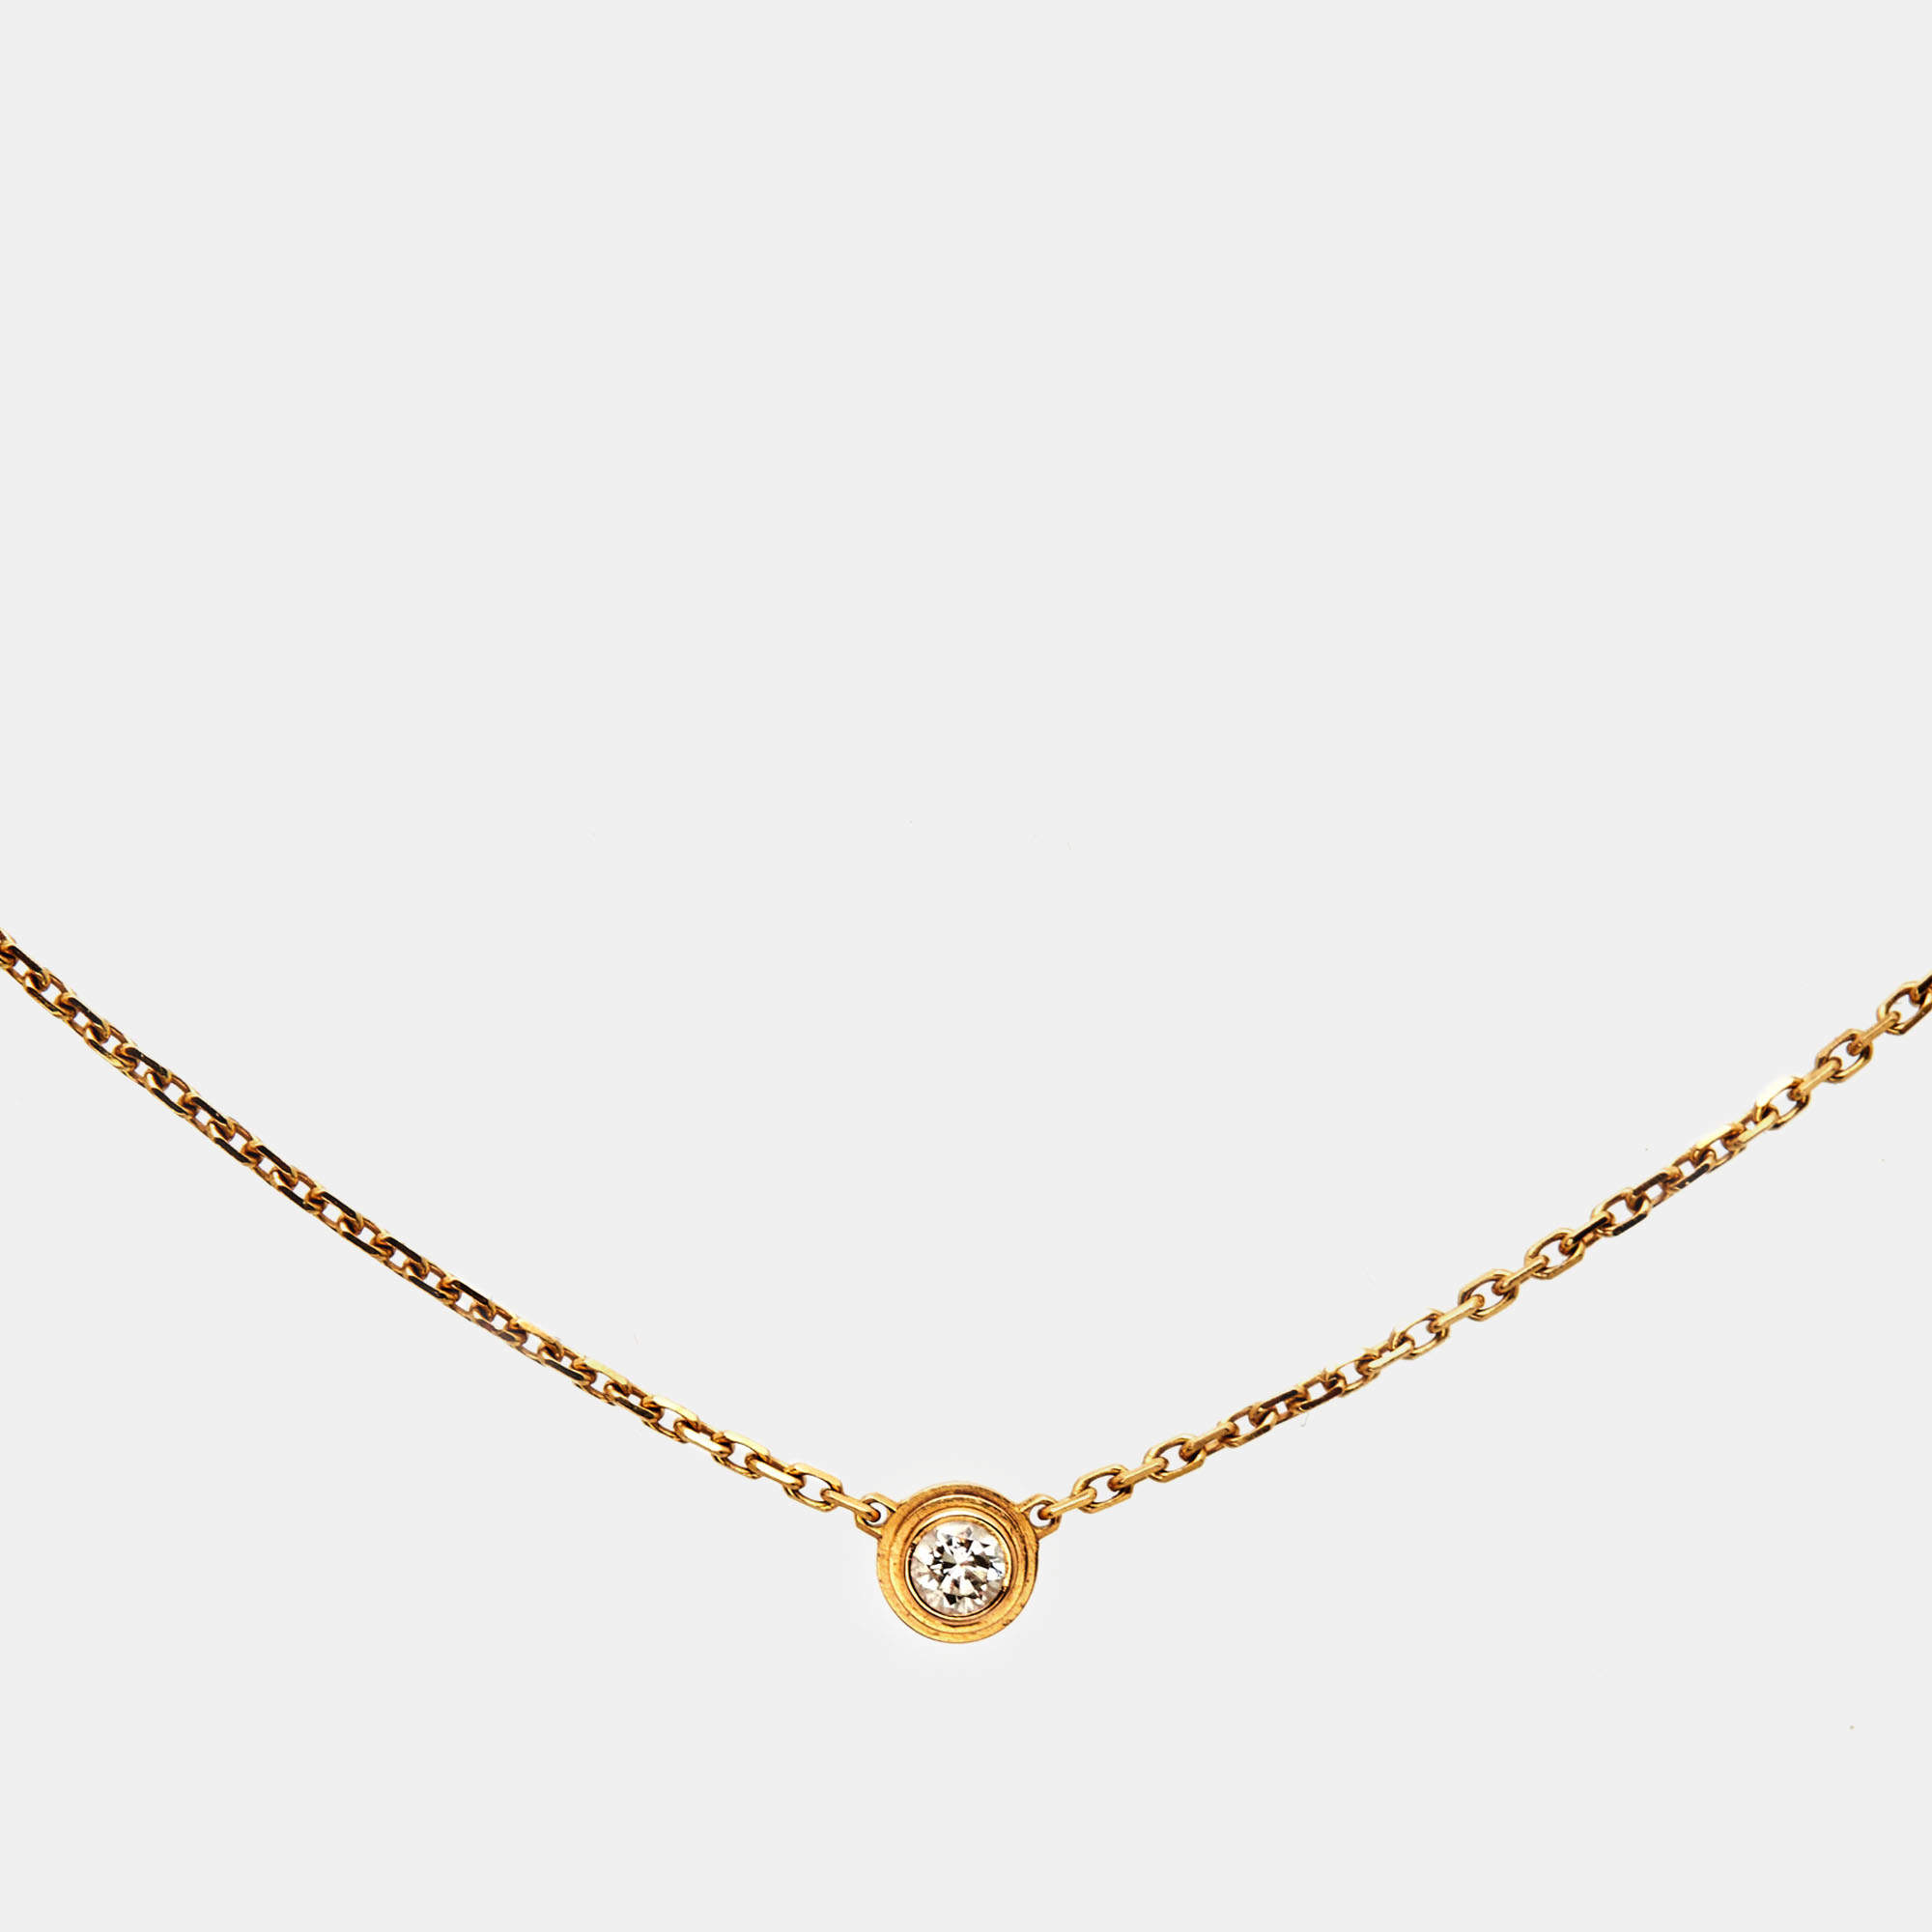 Cartier D'Amour Necklace Xs Yellow Gold | eBay